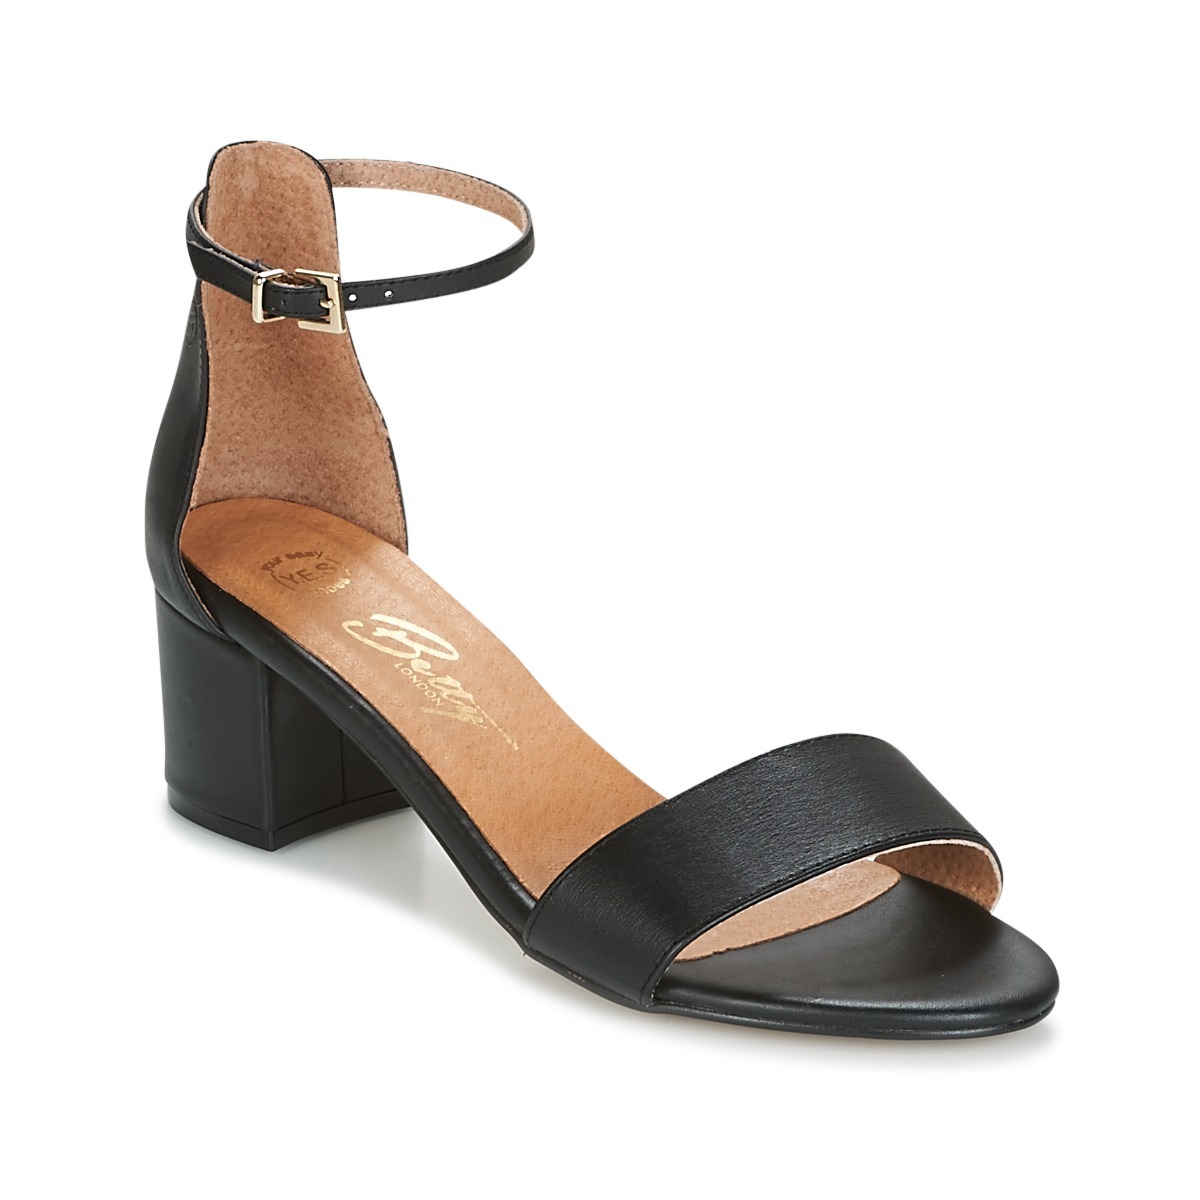 Betty London Sandals in Black for Women at Spartoo GOOFASH